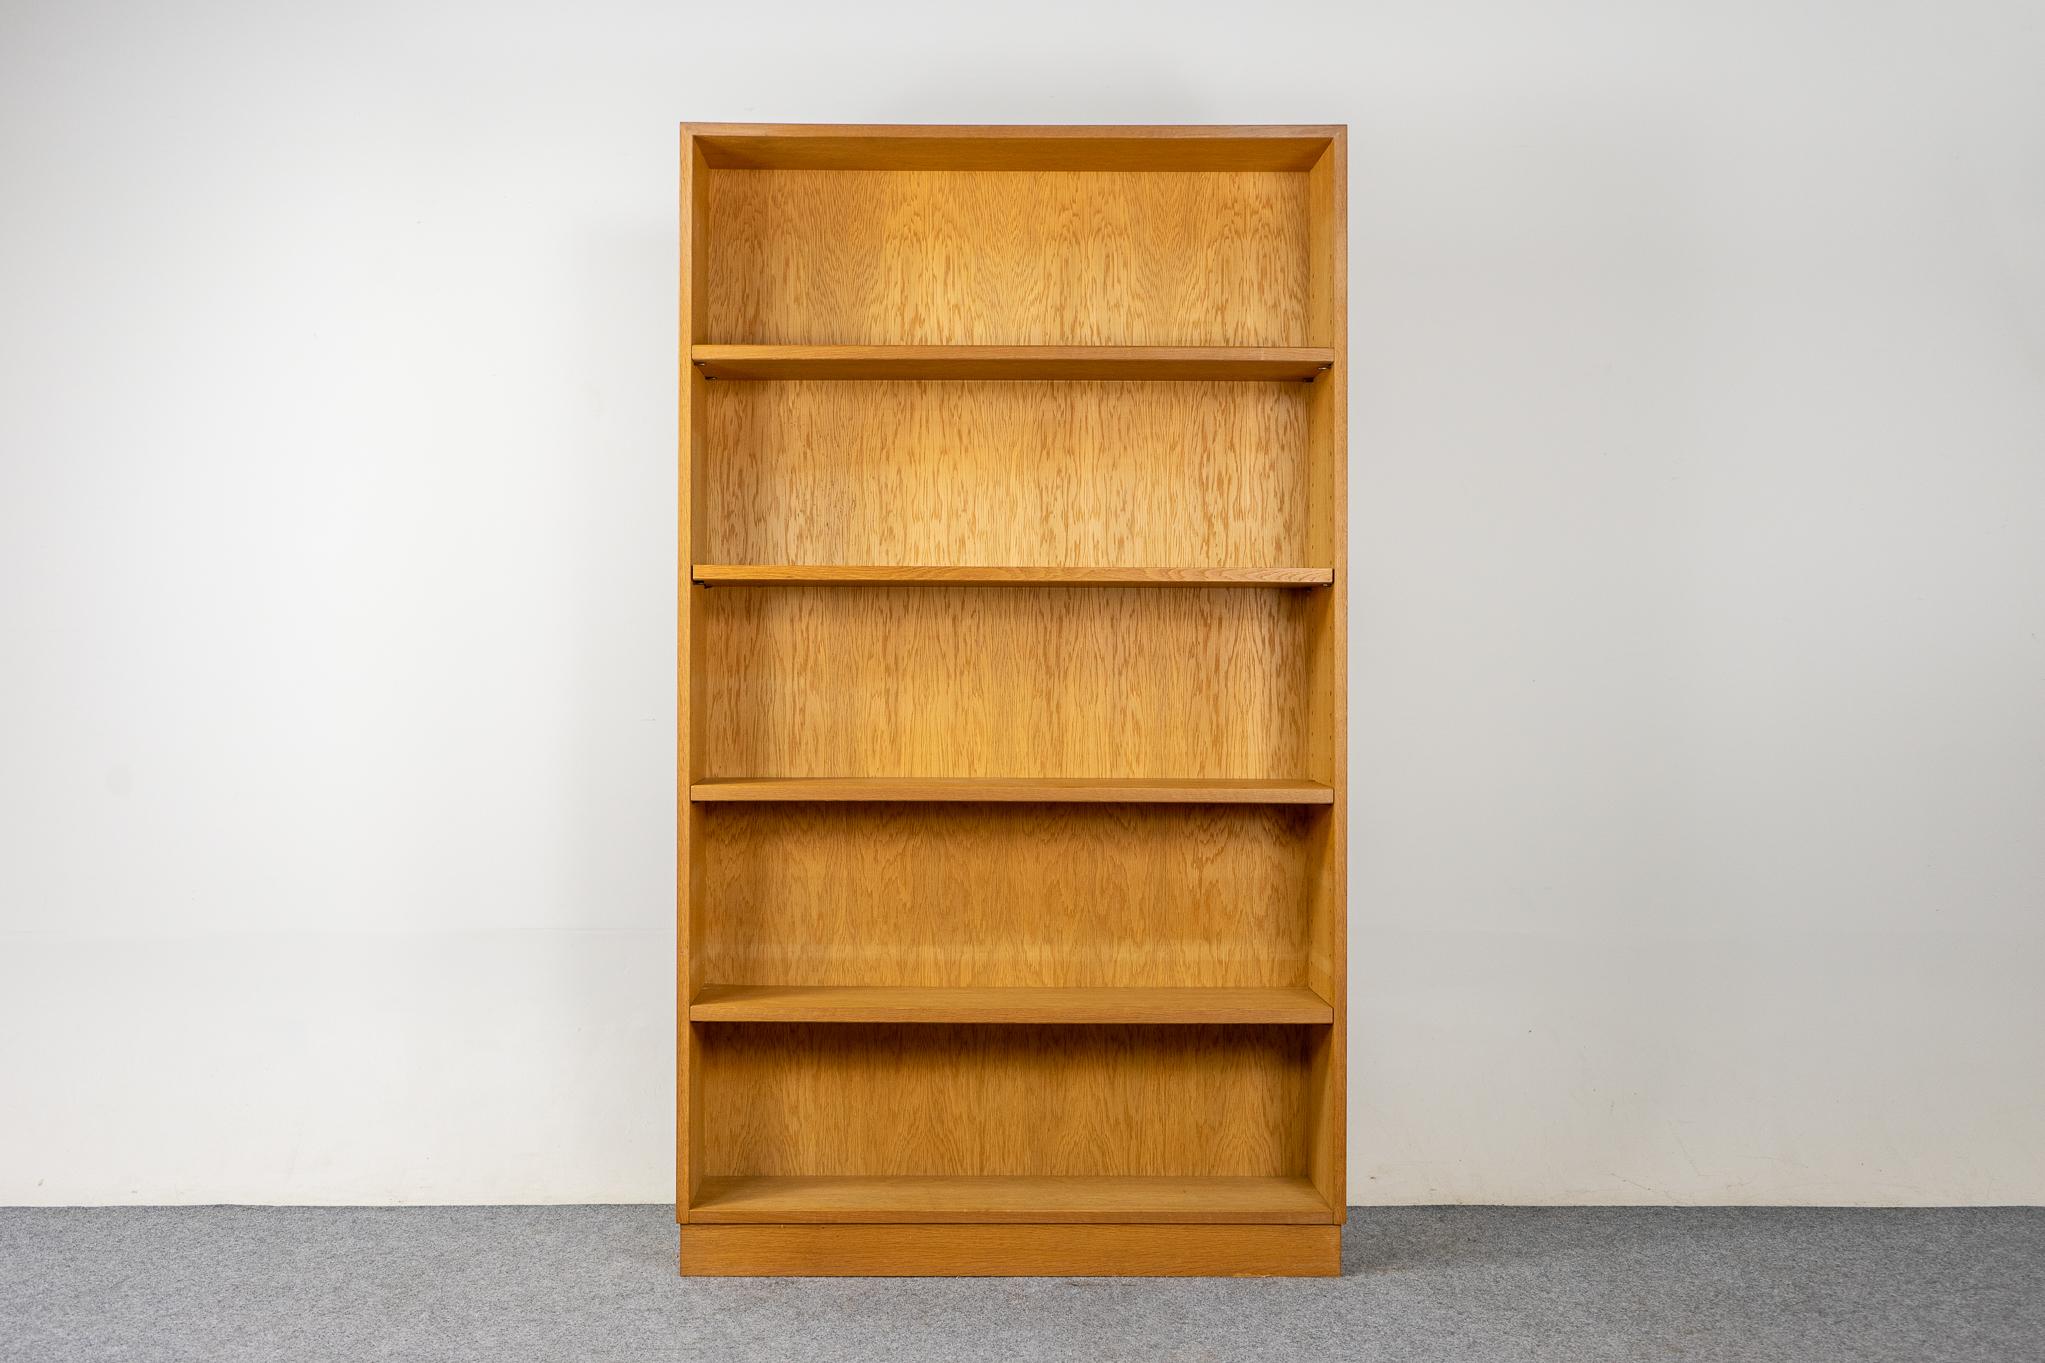 Danish Modern oak bookcase, circa 1960's. This open bookcase offers removable and adjustable shelving, removable legs and the compact design makes it the perfect condo sized storage solution. This tall open bookcase offers removable and adjustable